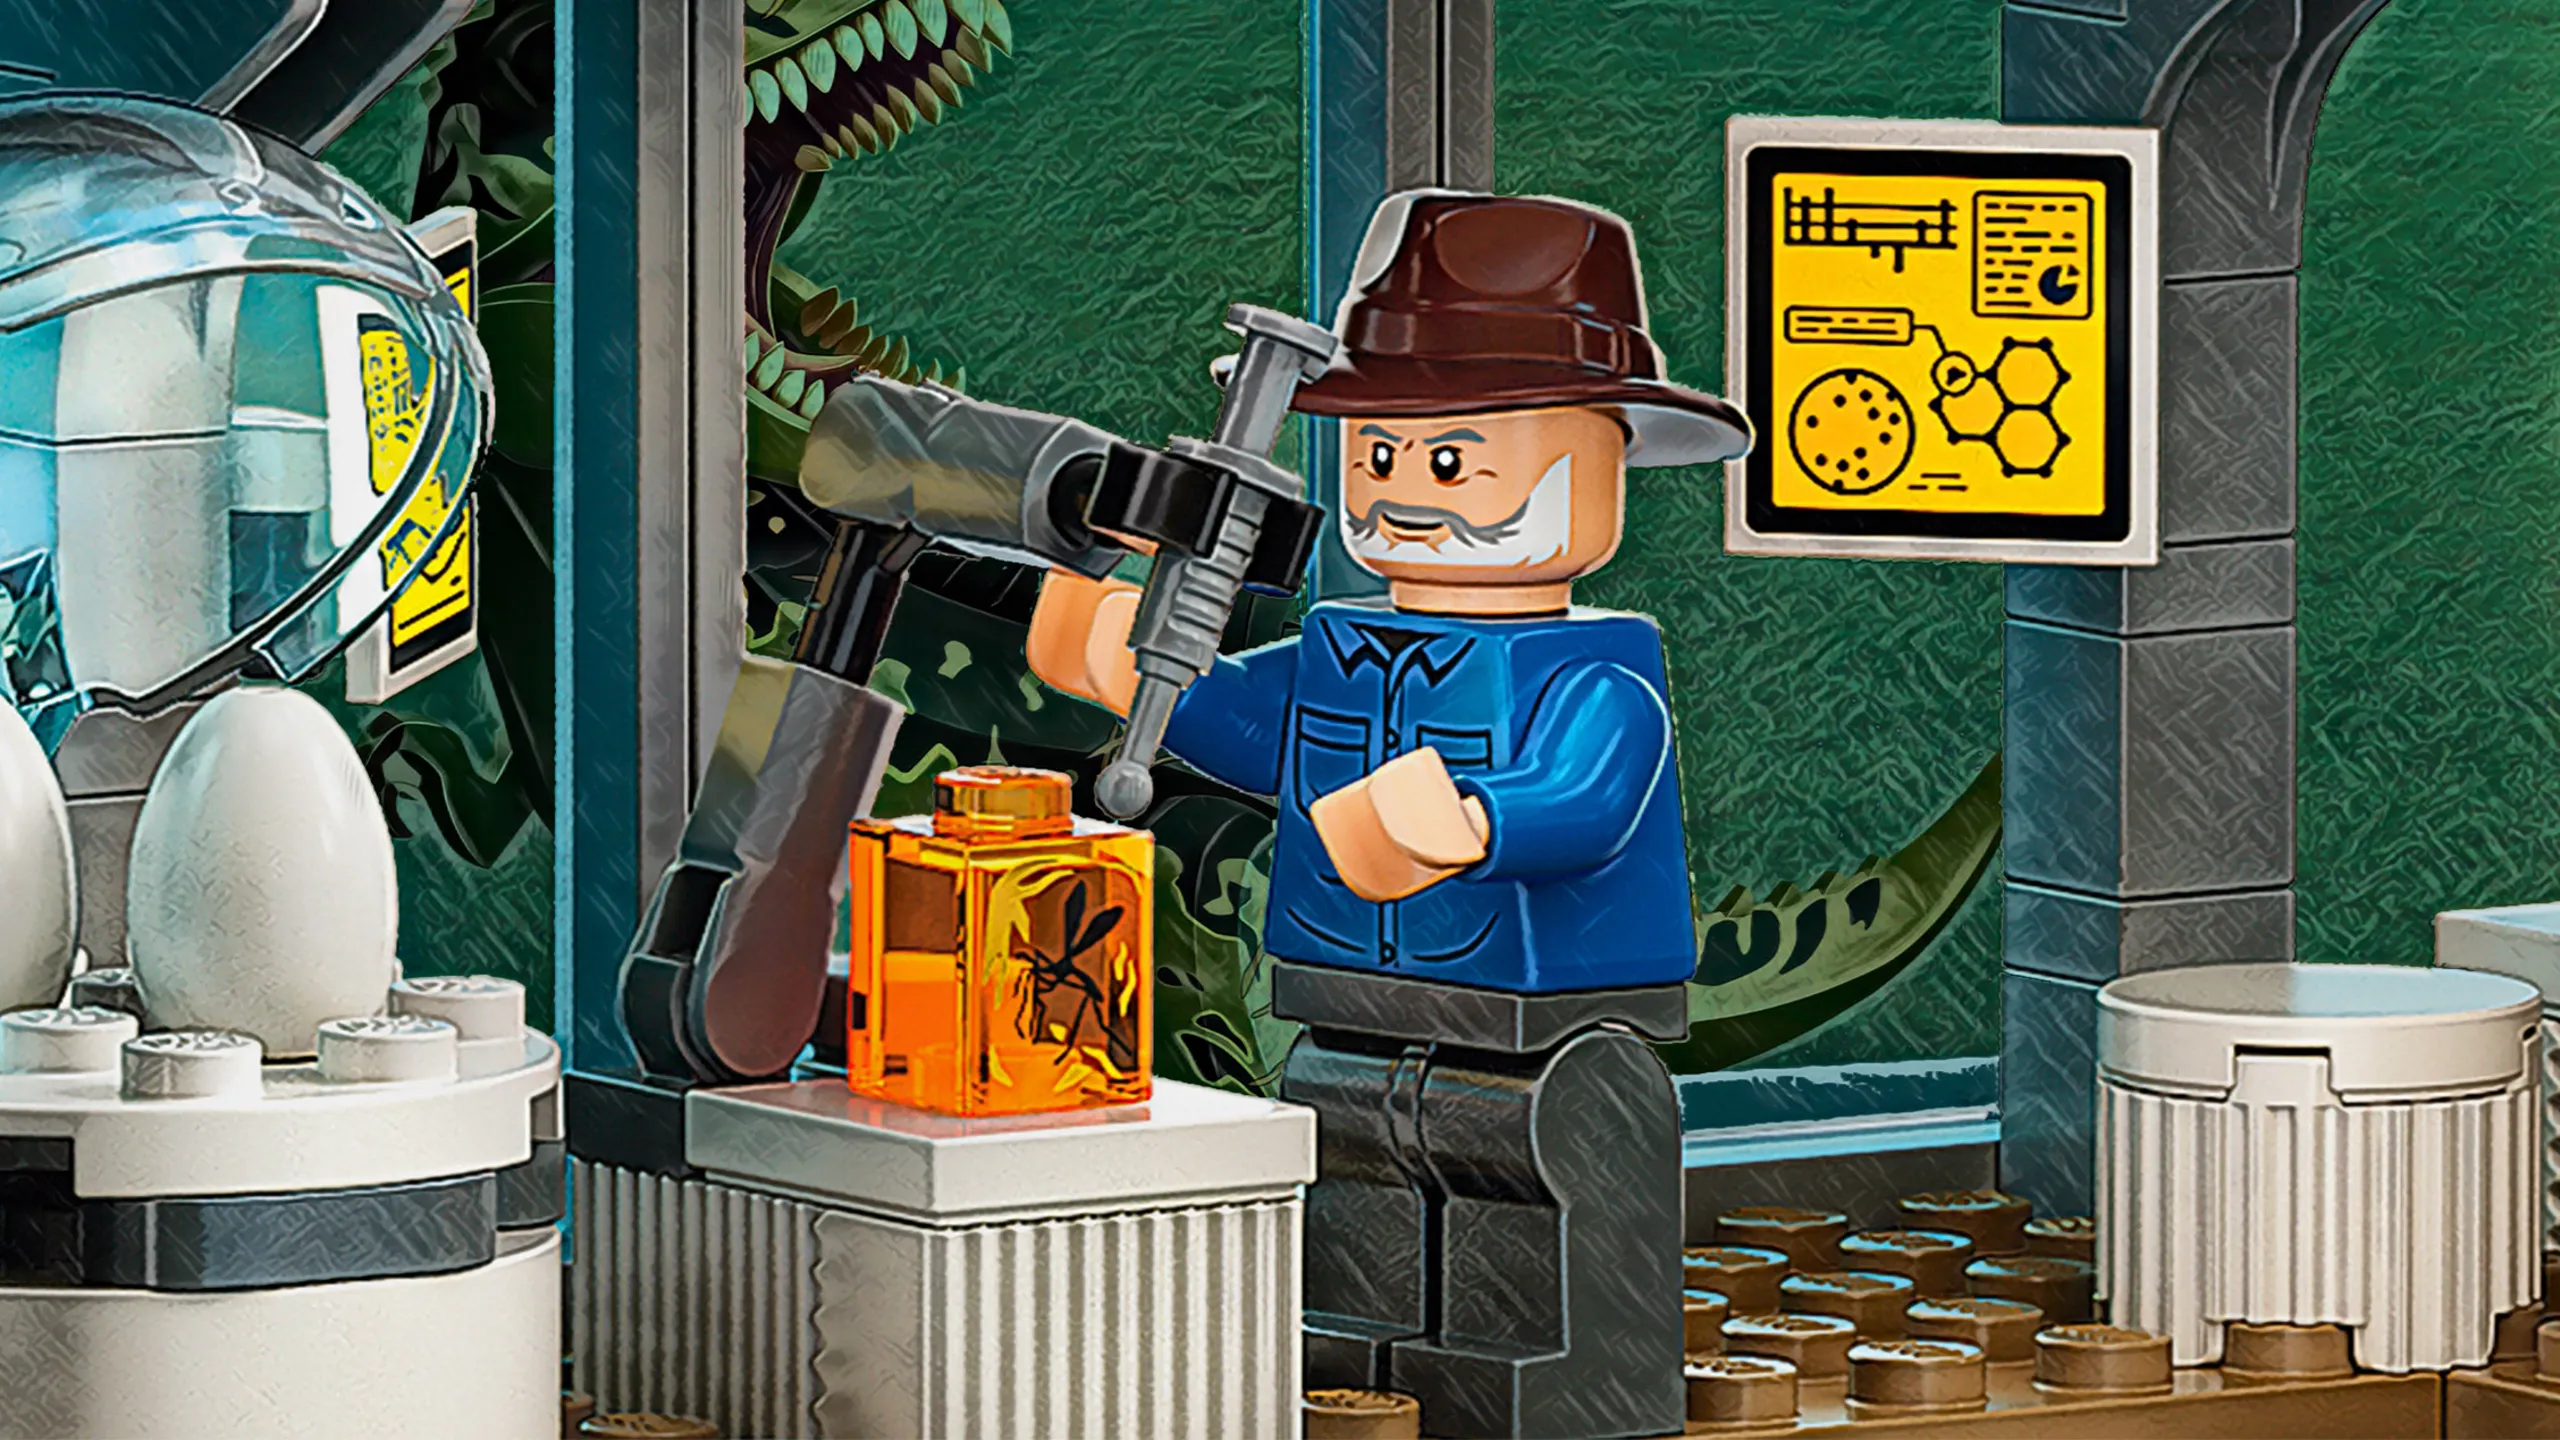 Lego Jurassic World Build Your Own Adventure - (lego Build Your